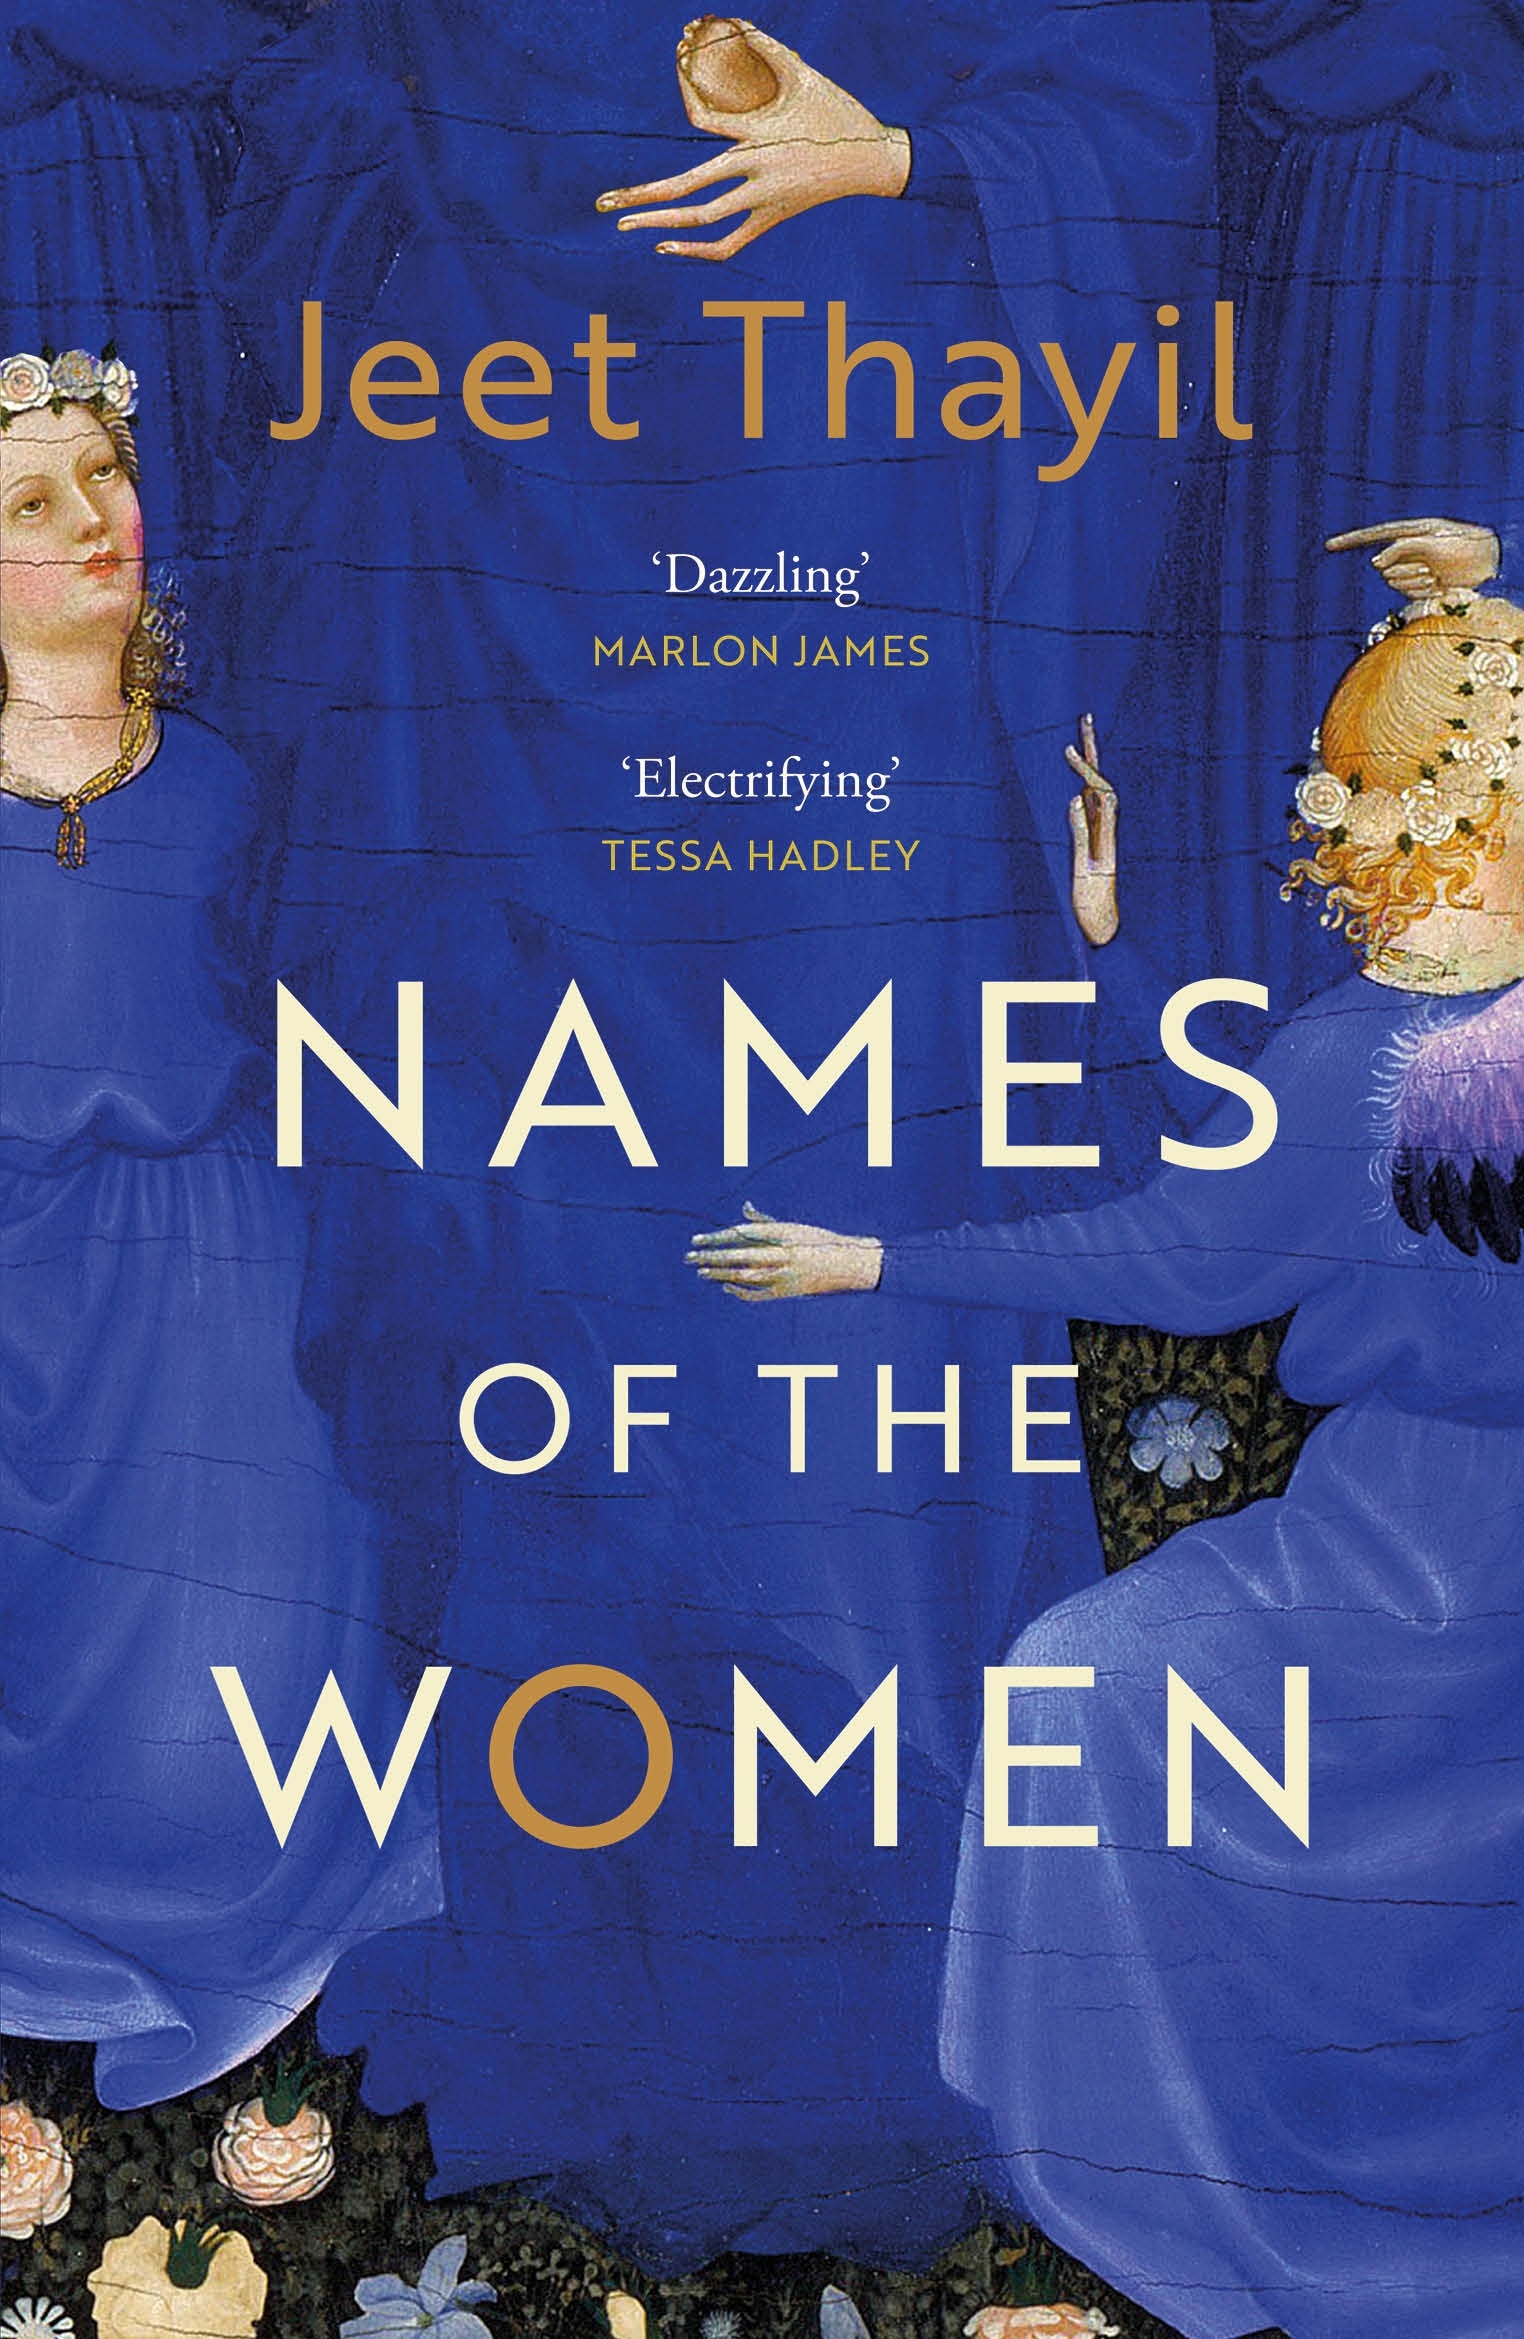 Book “Names of the Women” by Jeet Thayil — March 24, 2022